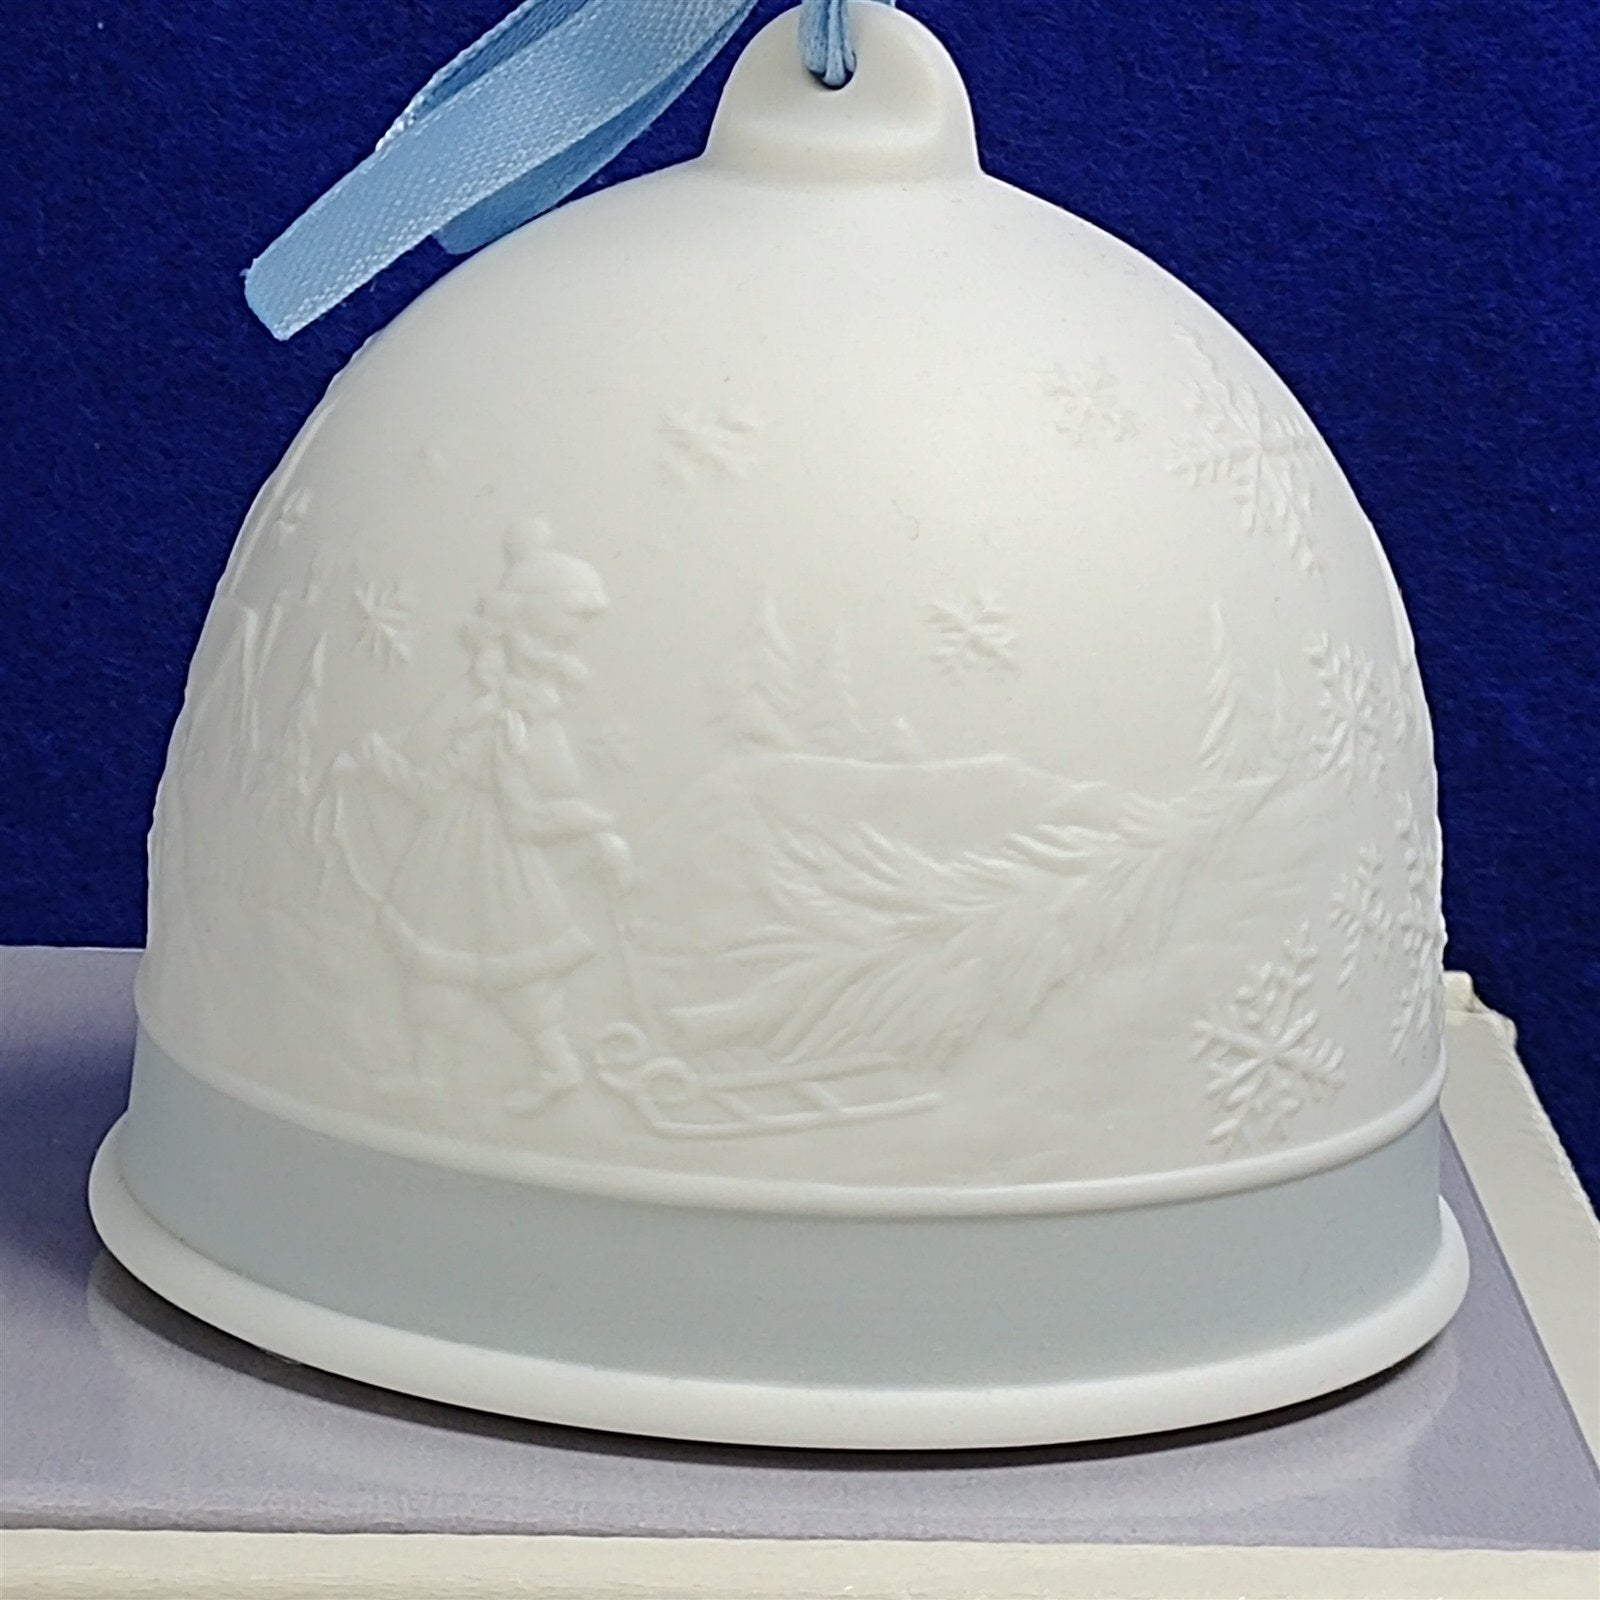 Lladro Ornament Collectors Society "Winter Bell" 17616 with Box